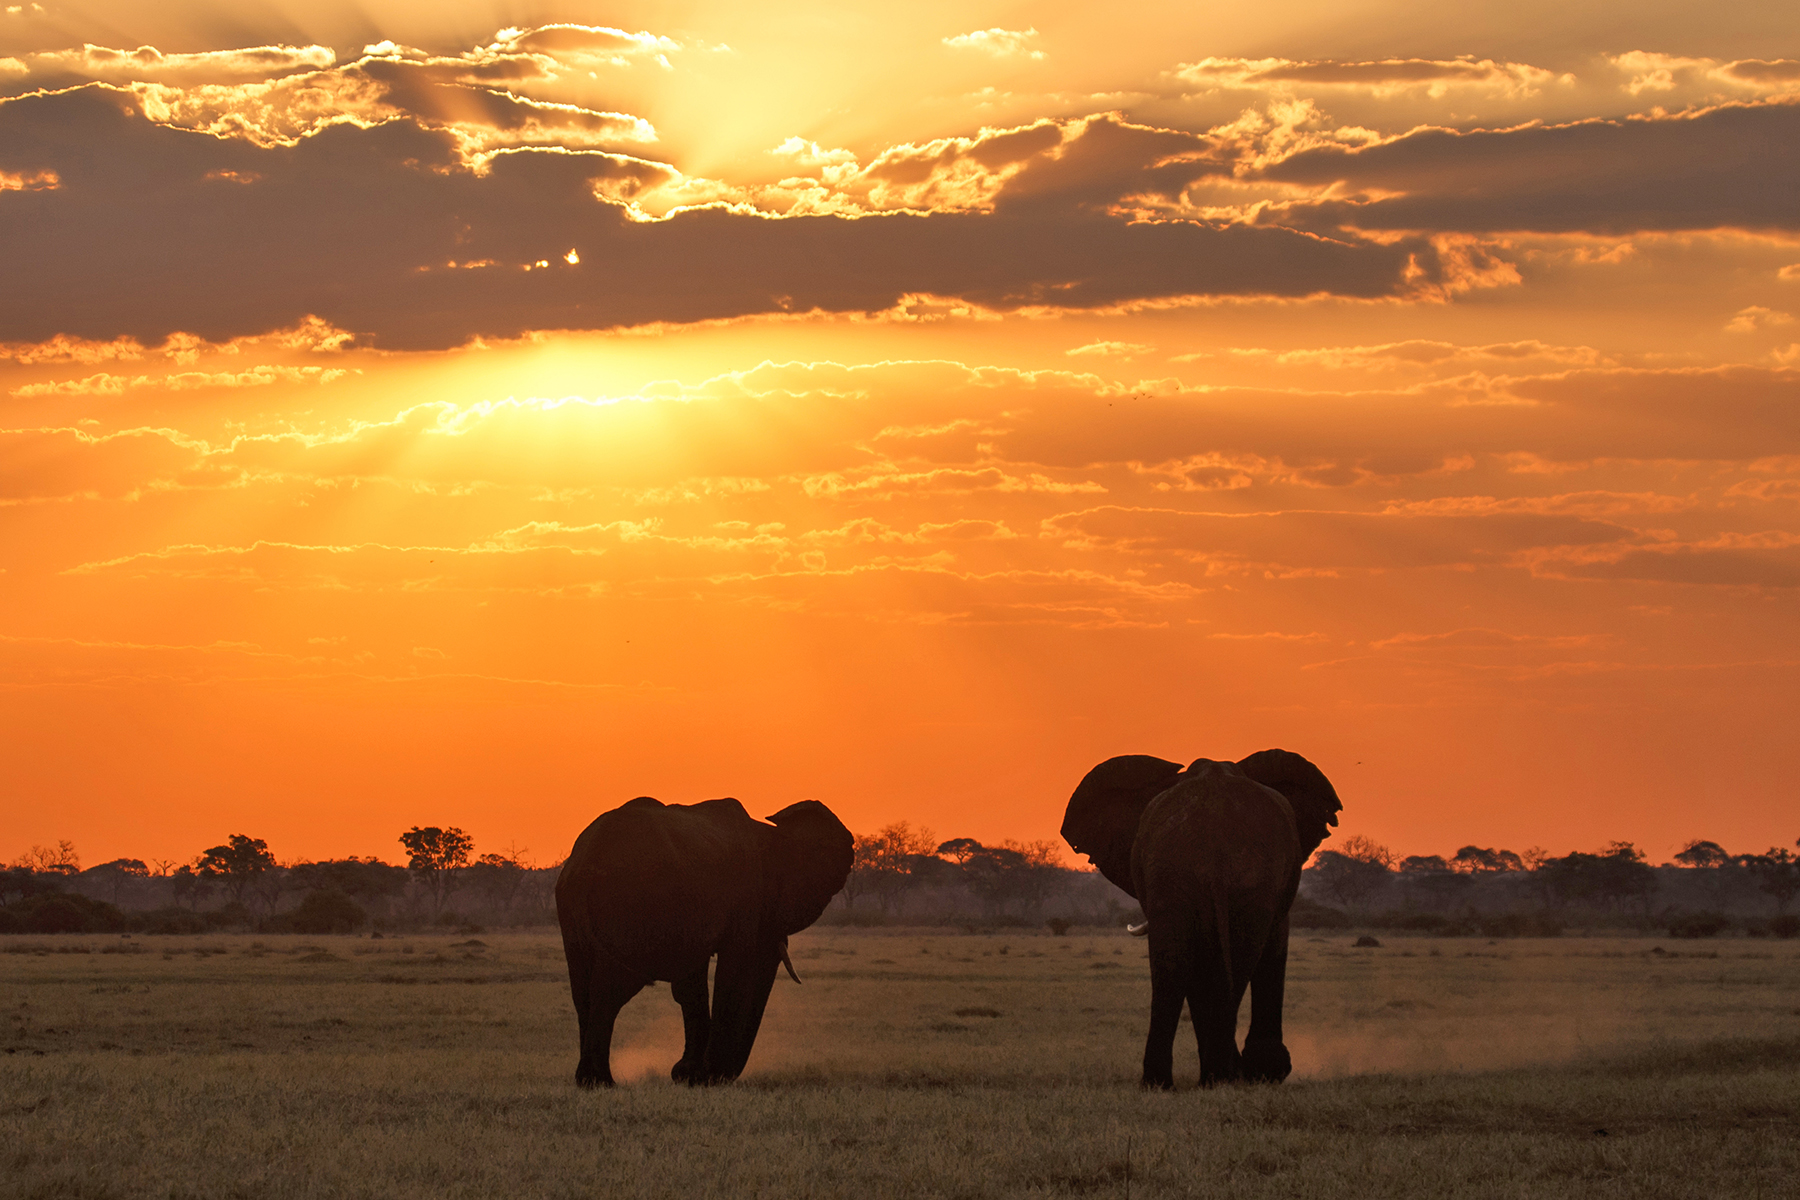 Elephants with a sunset in the background